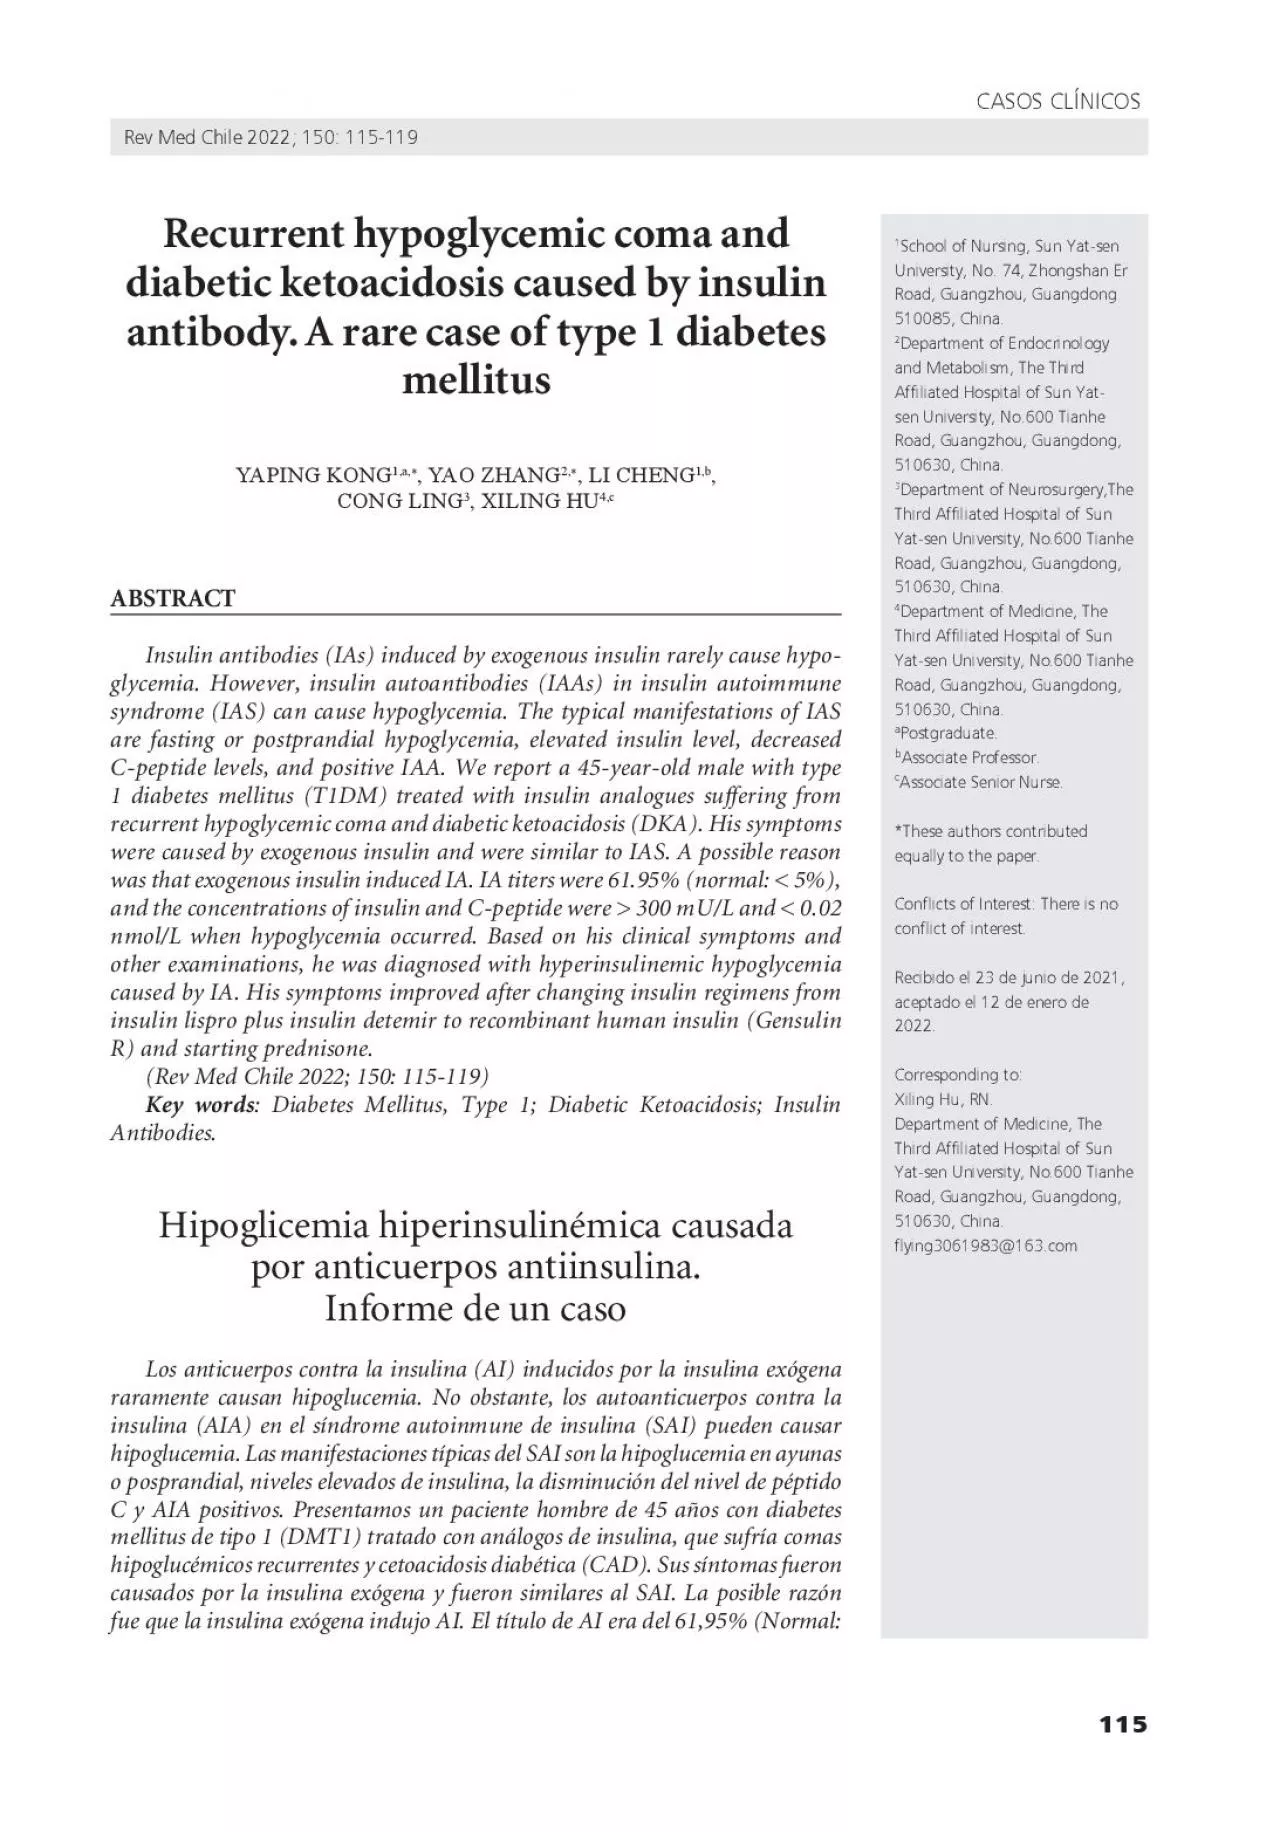 F Insulin Autoimmune Syndrome 73 Cases of Clinical treatment in 42 t